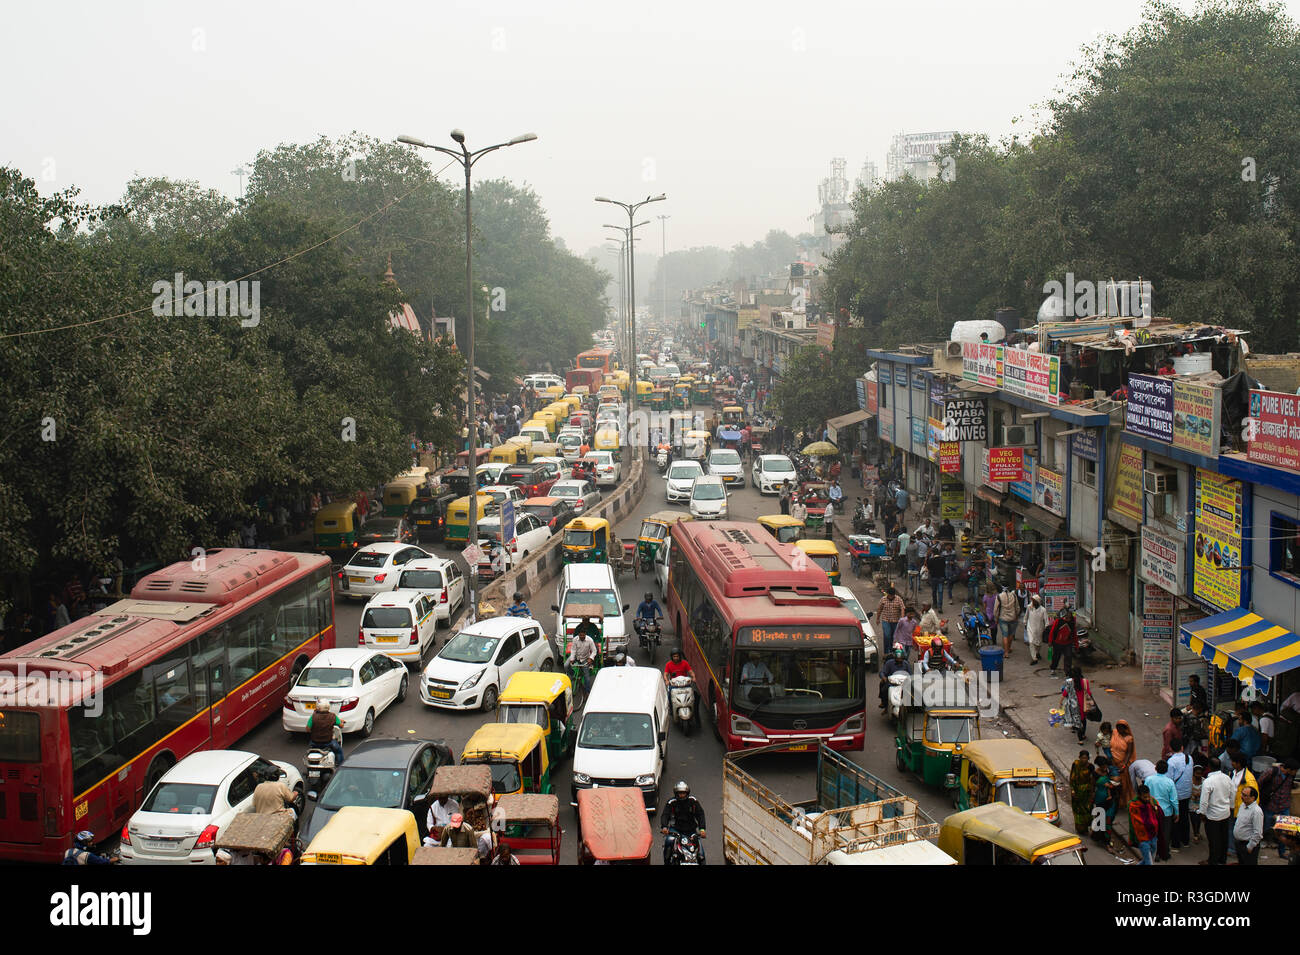 Traffic jam on the polluted streets of New Delhi, India. Stock Photo